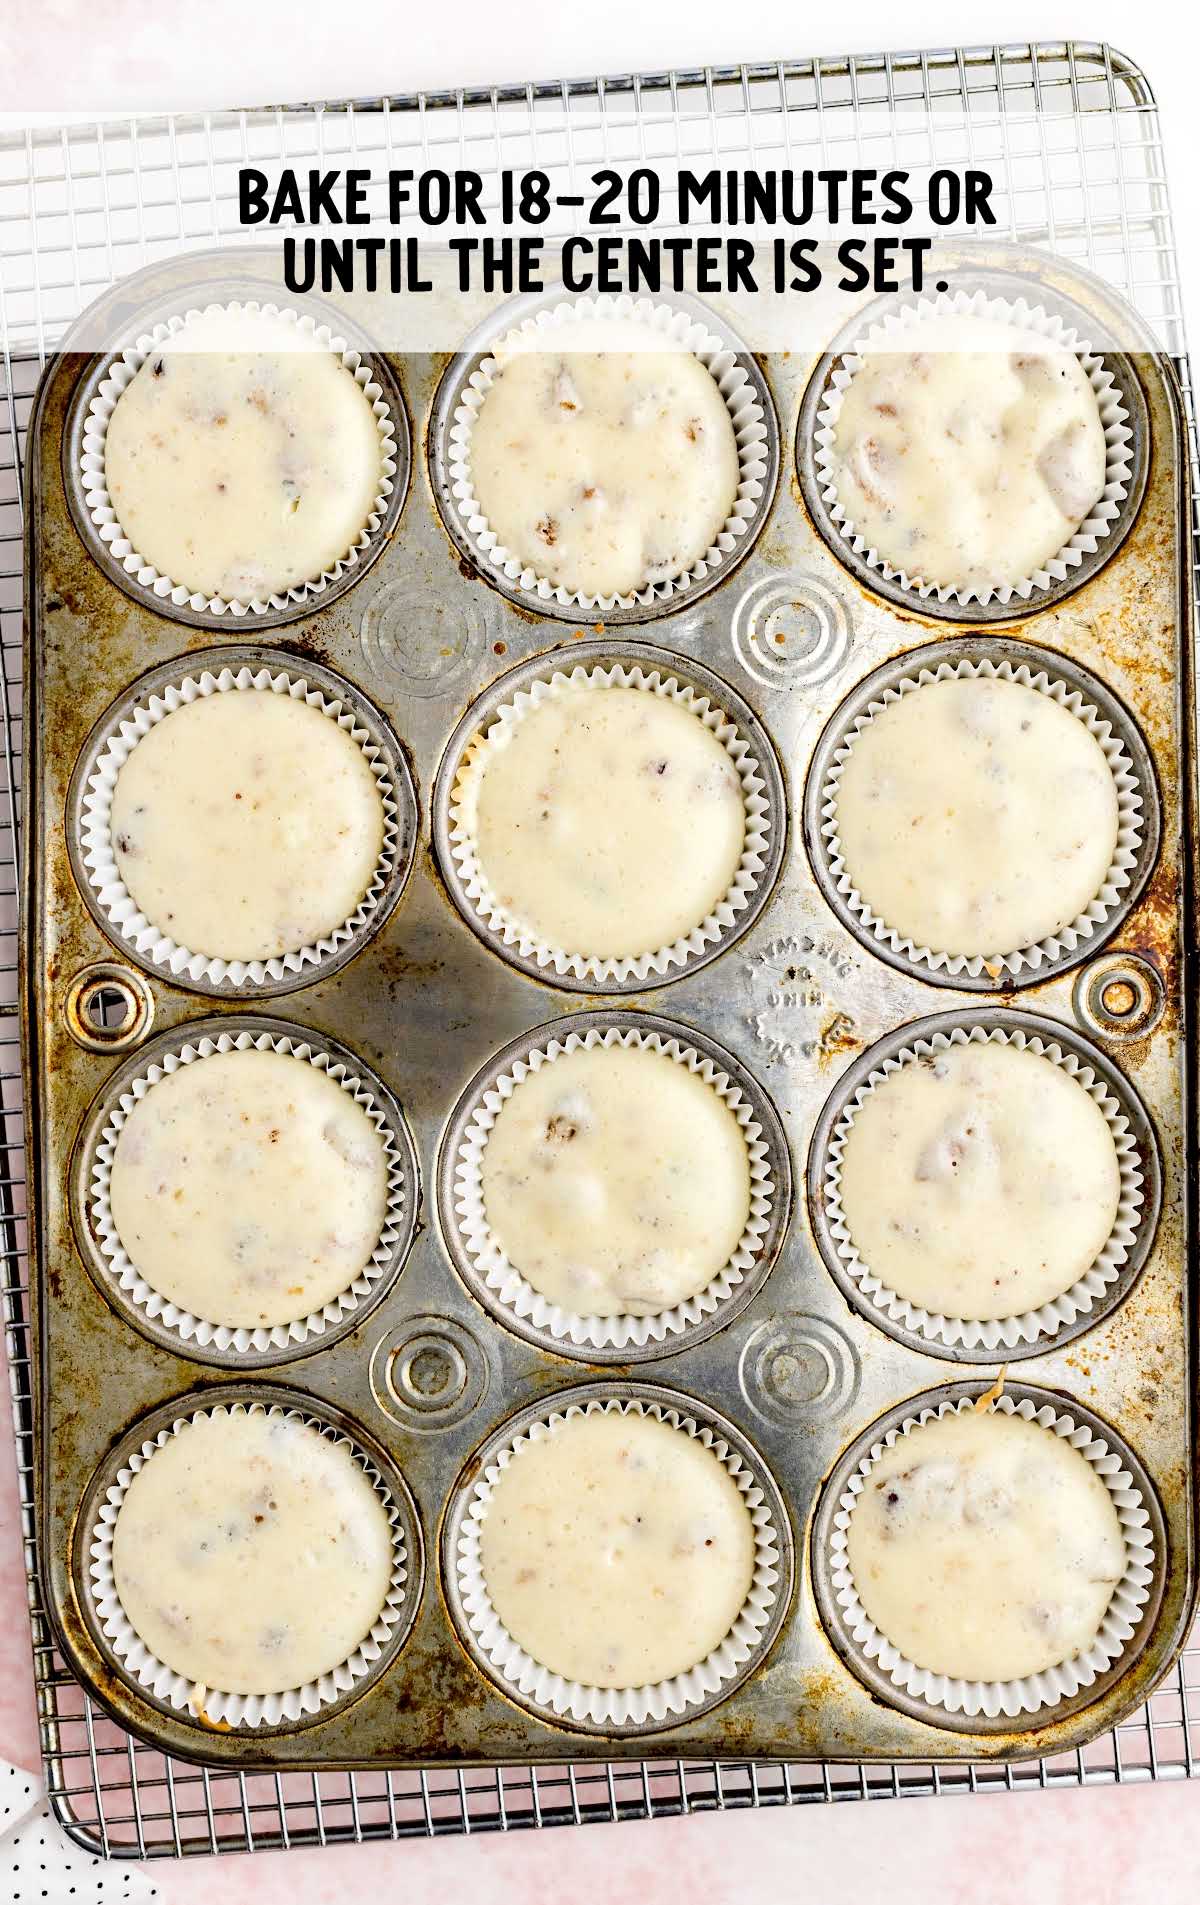 cheesecake cookie baked in a muffin pan until center is set